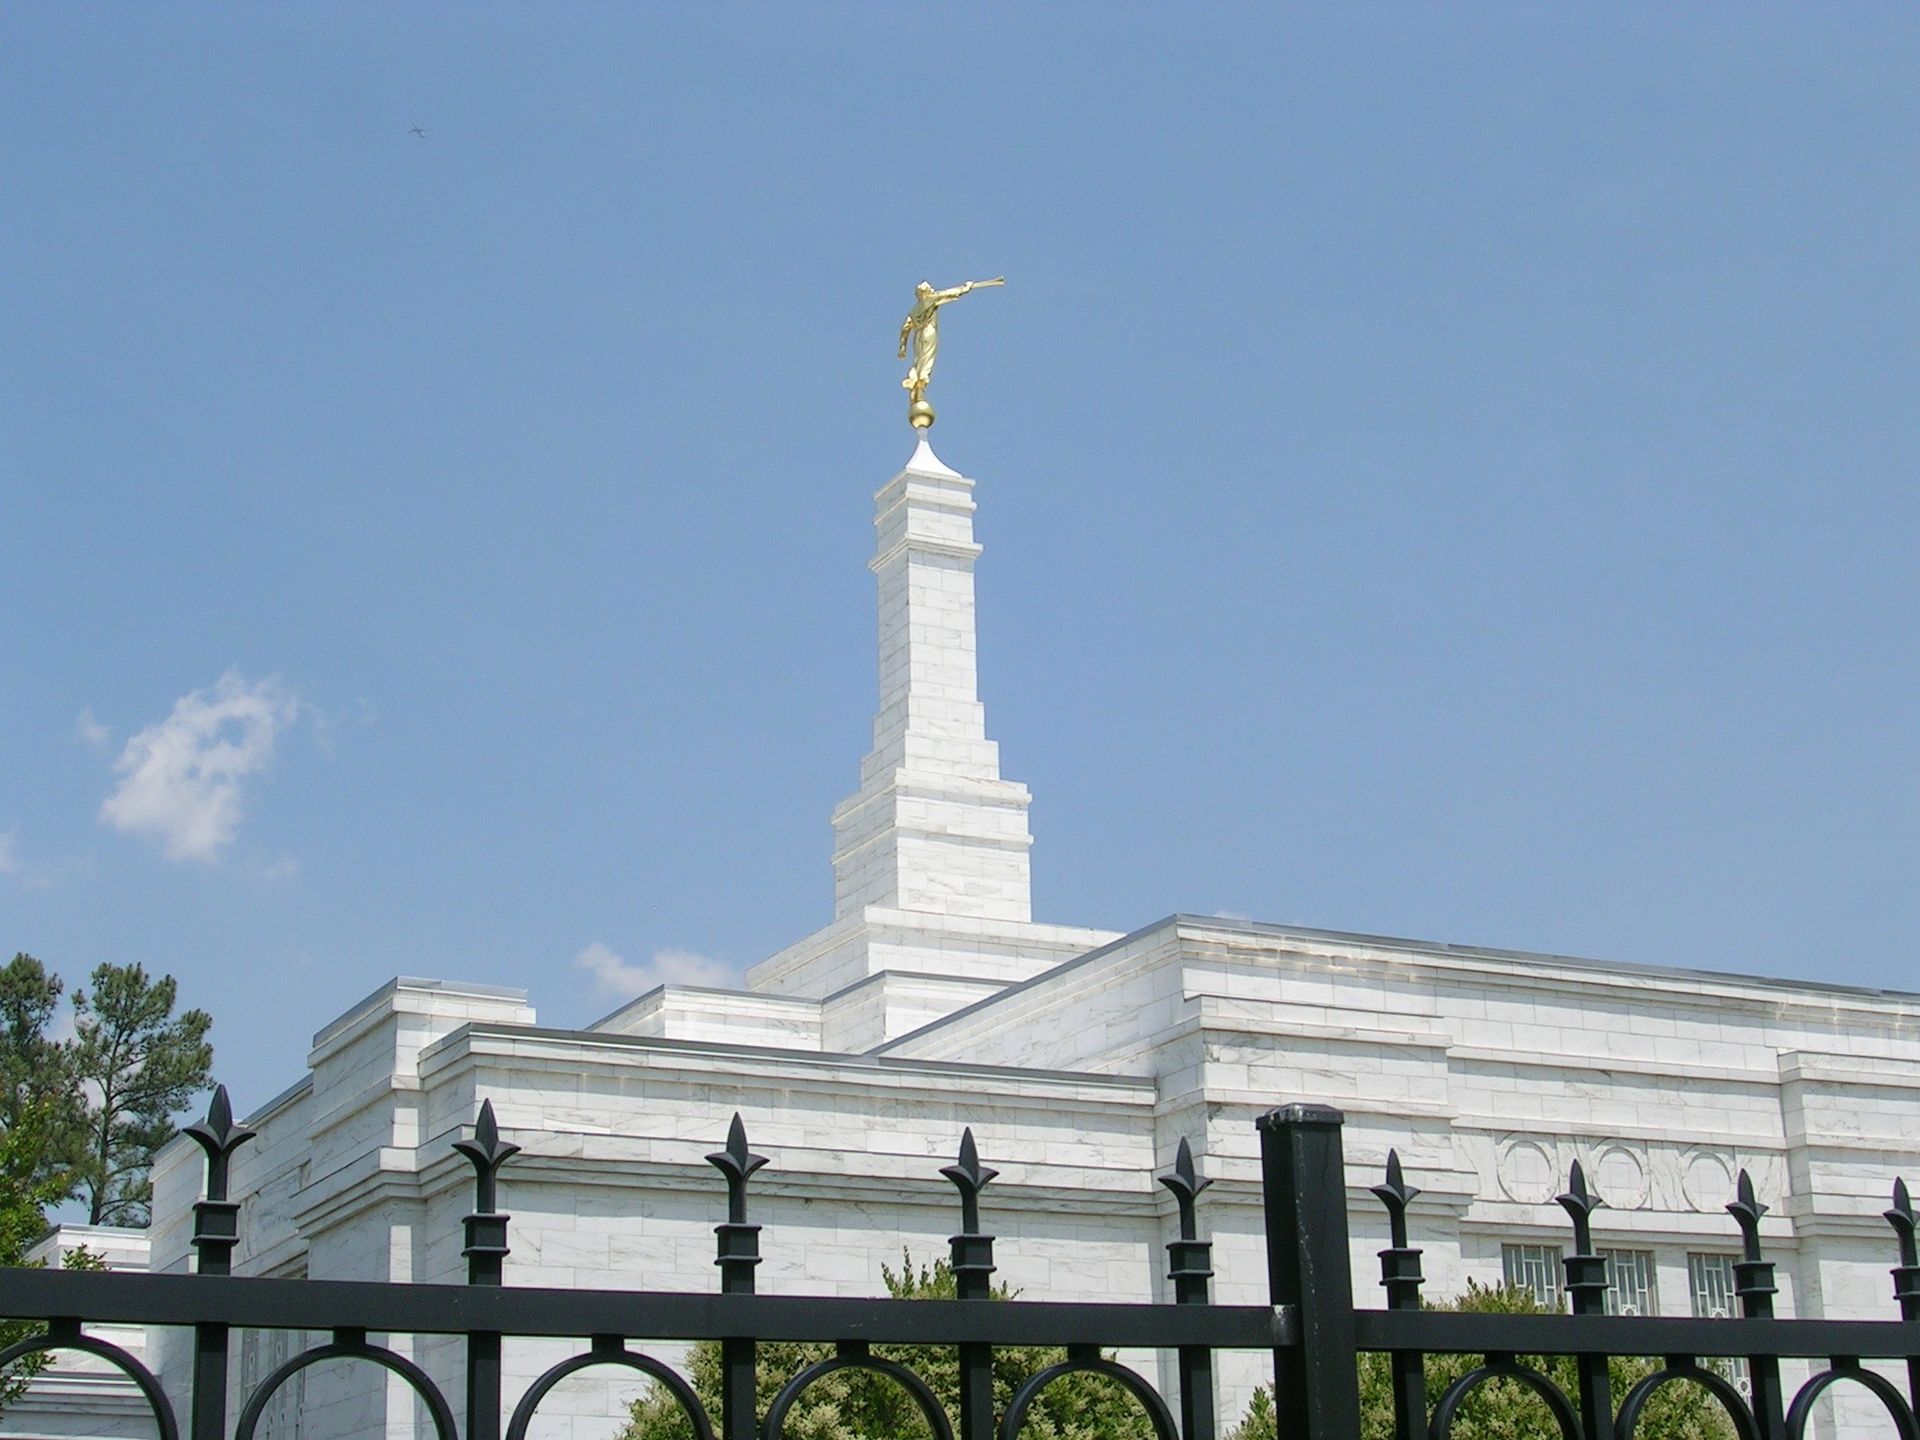 The Raleigh North Carolina Temple spire, including scenery and the exterior of the temple.